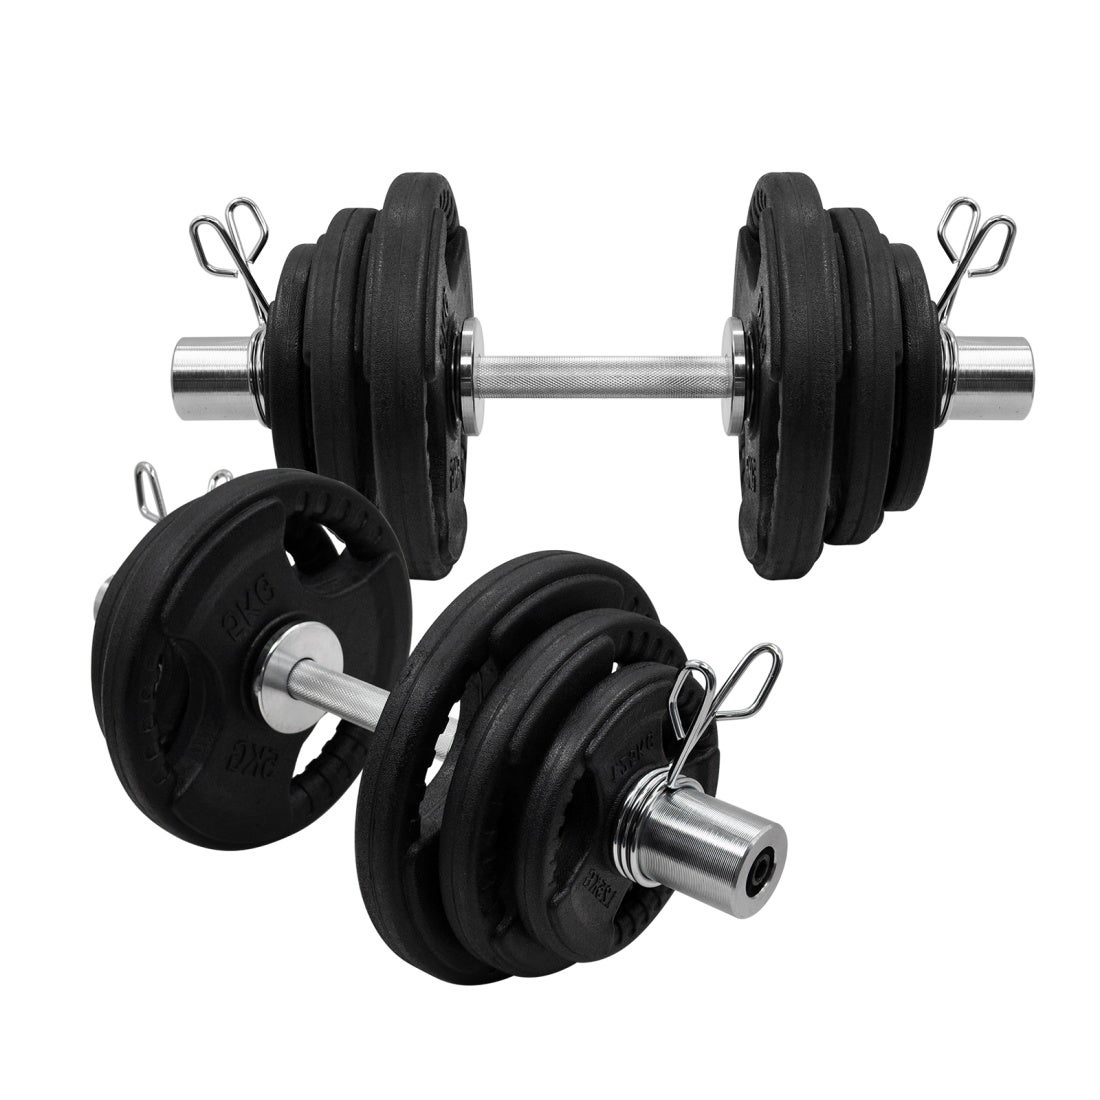 43kg & 58kg Olympic Dumbell Set - Rubber Coated Iron Plate Dumbbell Weight Set